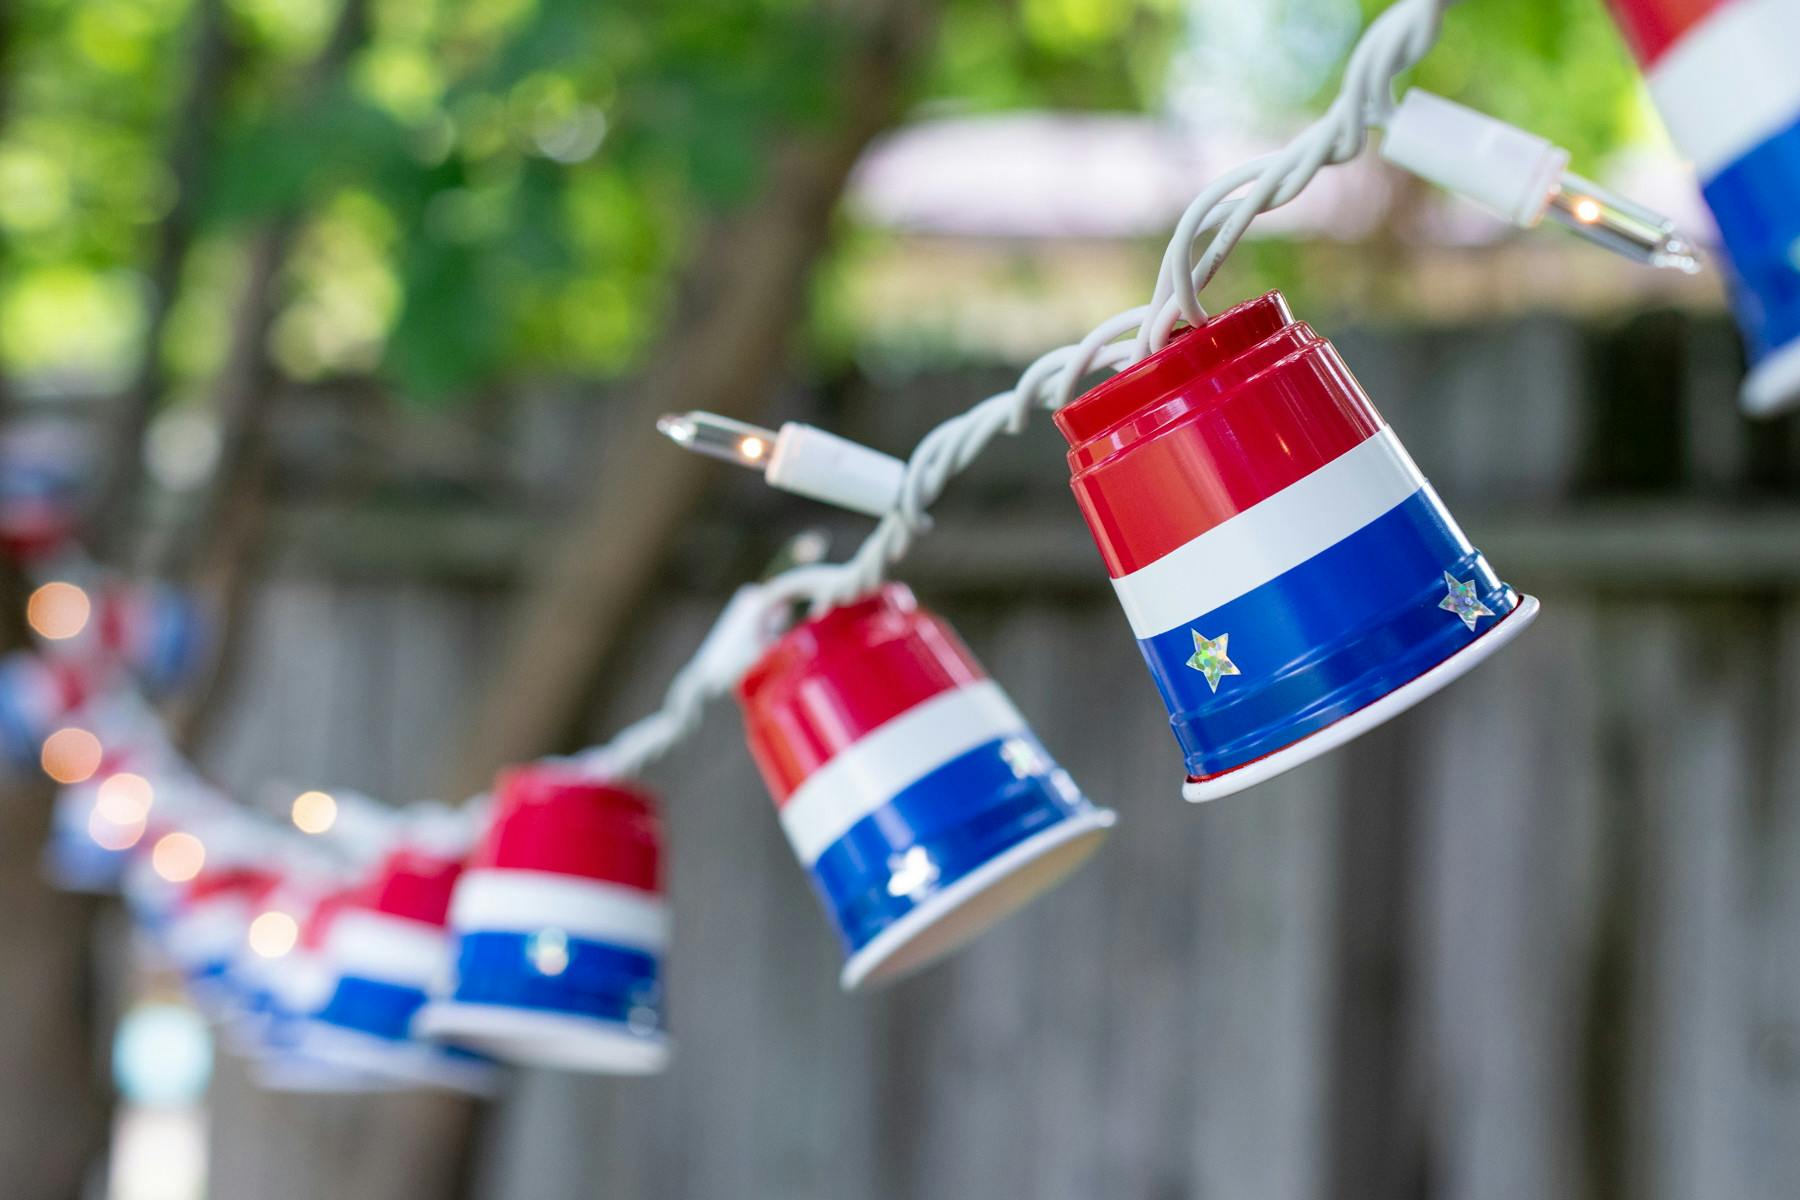 Red plastic shot glass cups affixed to party lights with blue and white electrical tape and star stickers hanging across a backyard.